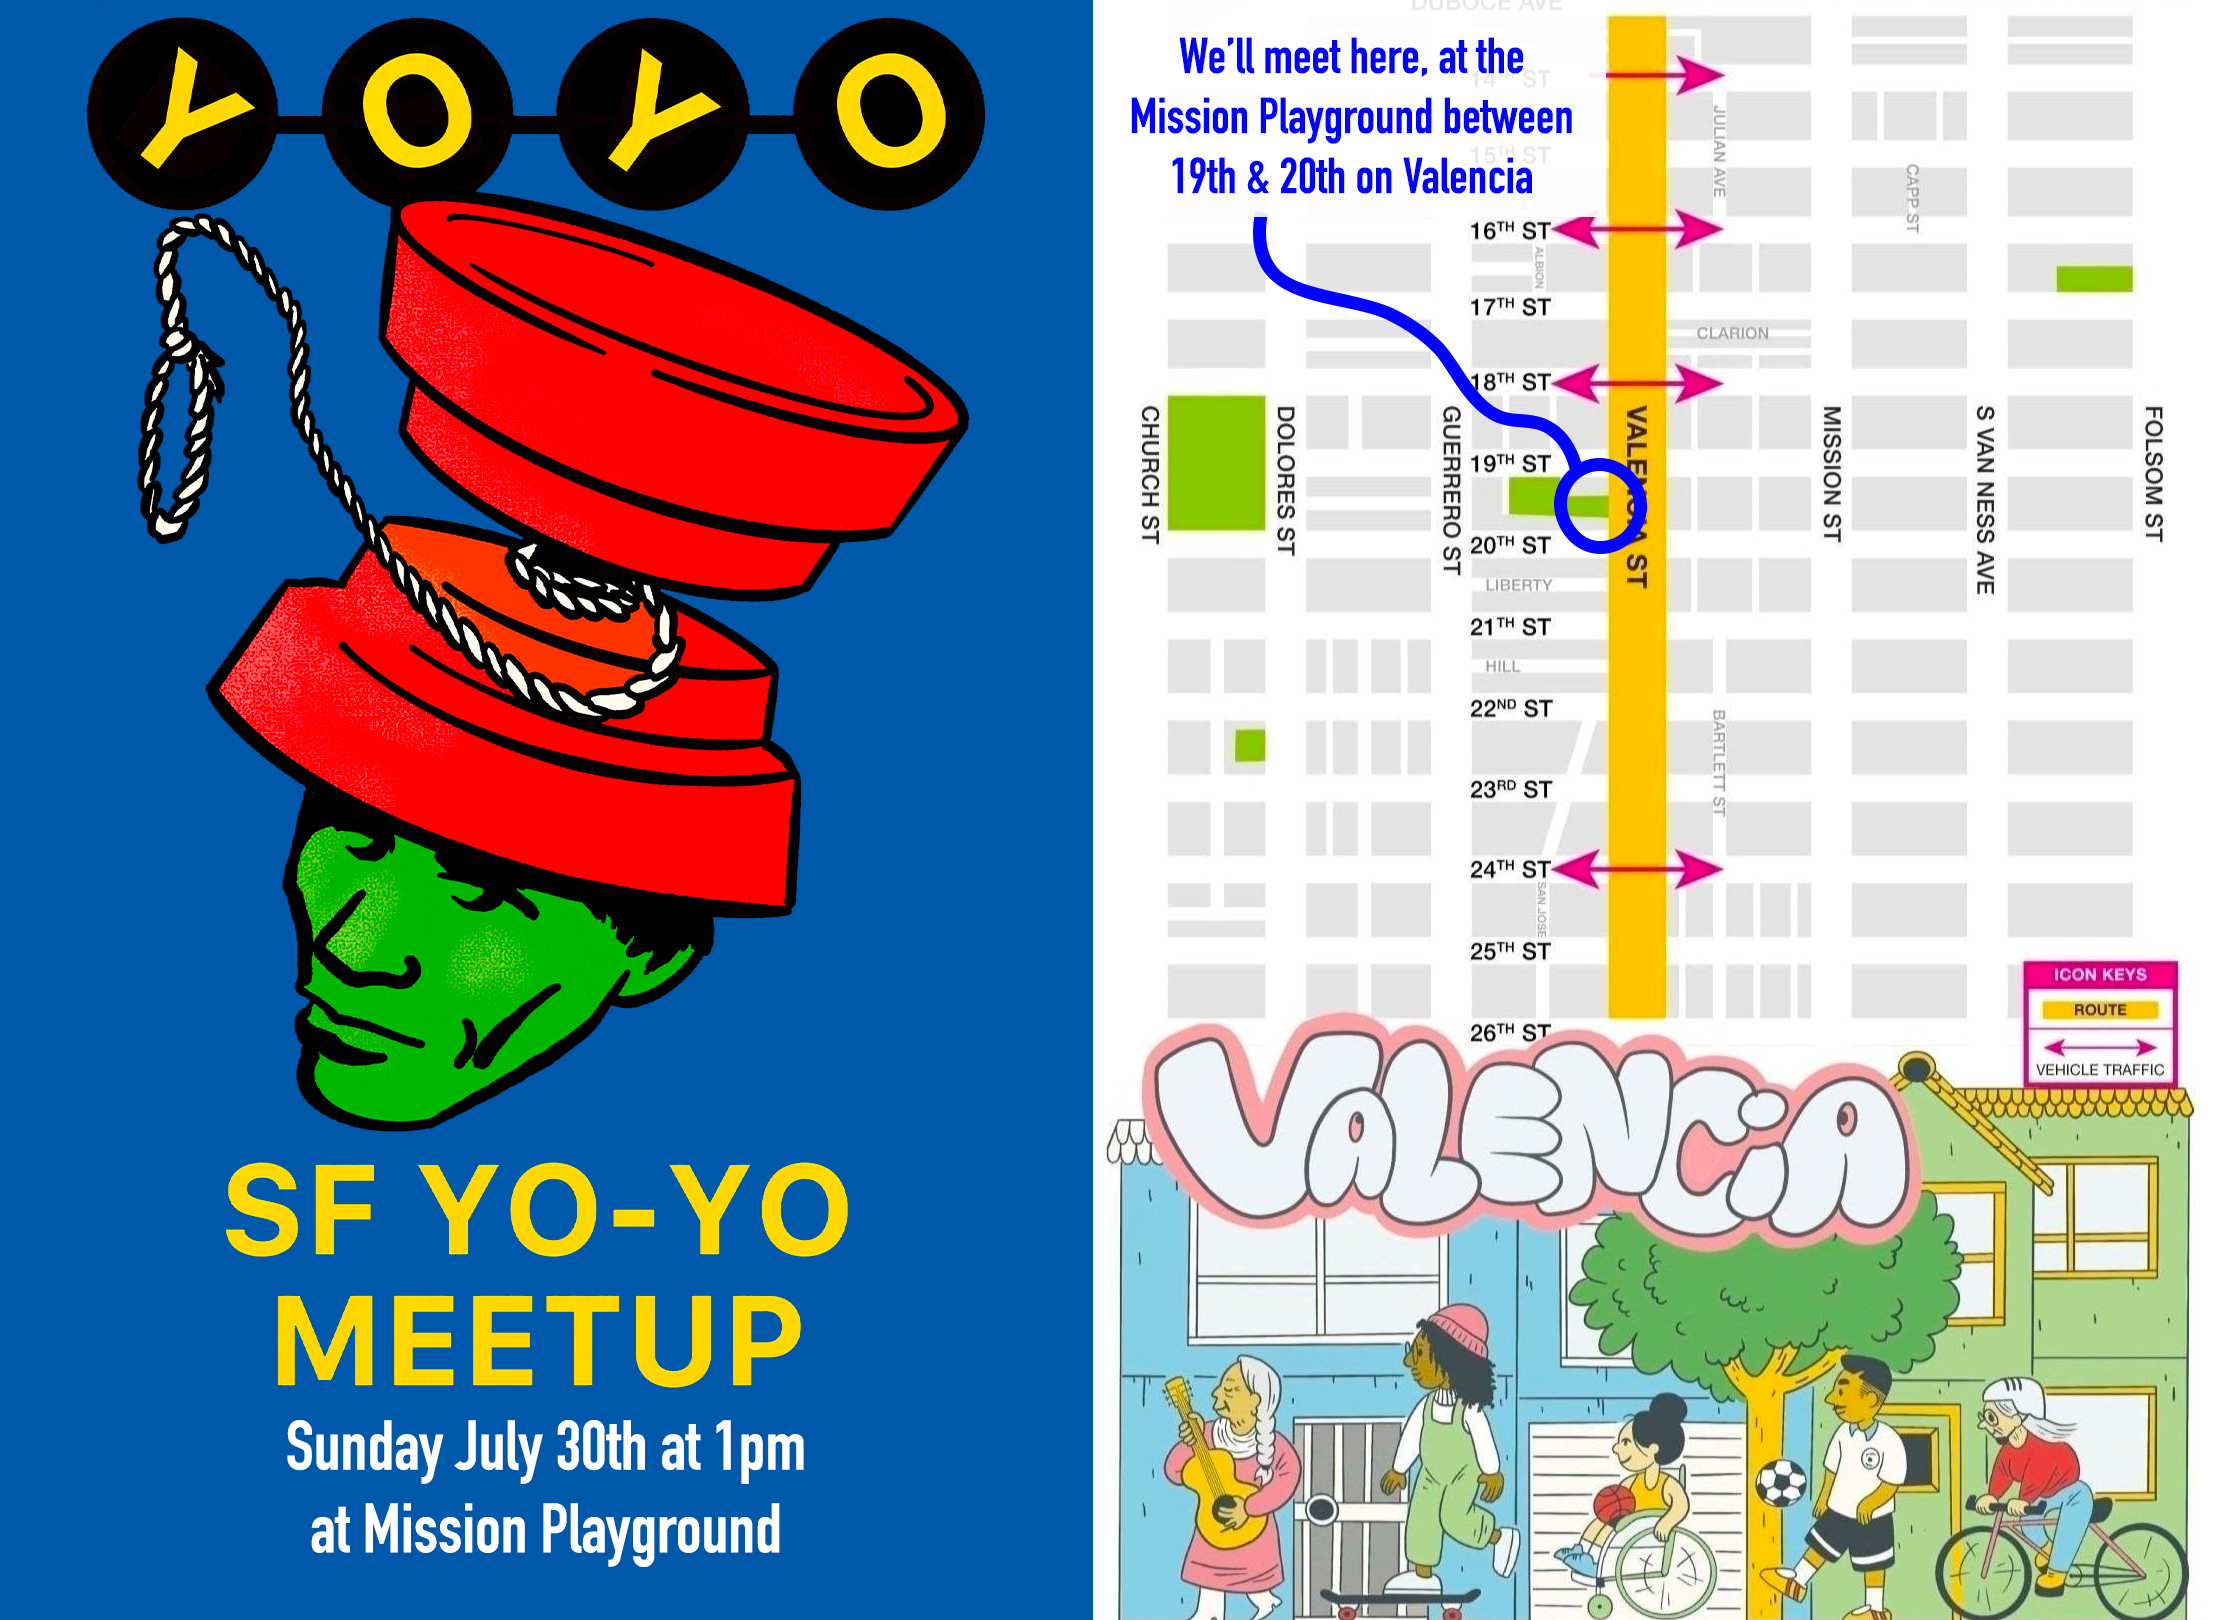 A flyer for the "SF Yo-Yo Meetup" that lists the time as July 30th, 2023 at 1pm in the Mission Playground. There is a also a map that shows the specific location on Valencia Street, halfway between 19th and 20th streets.